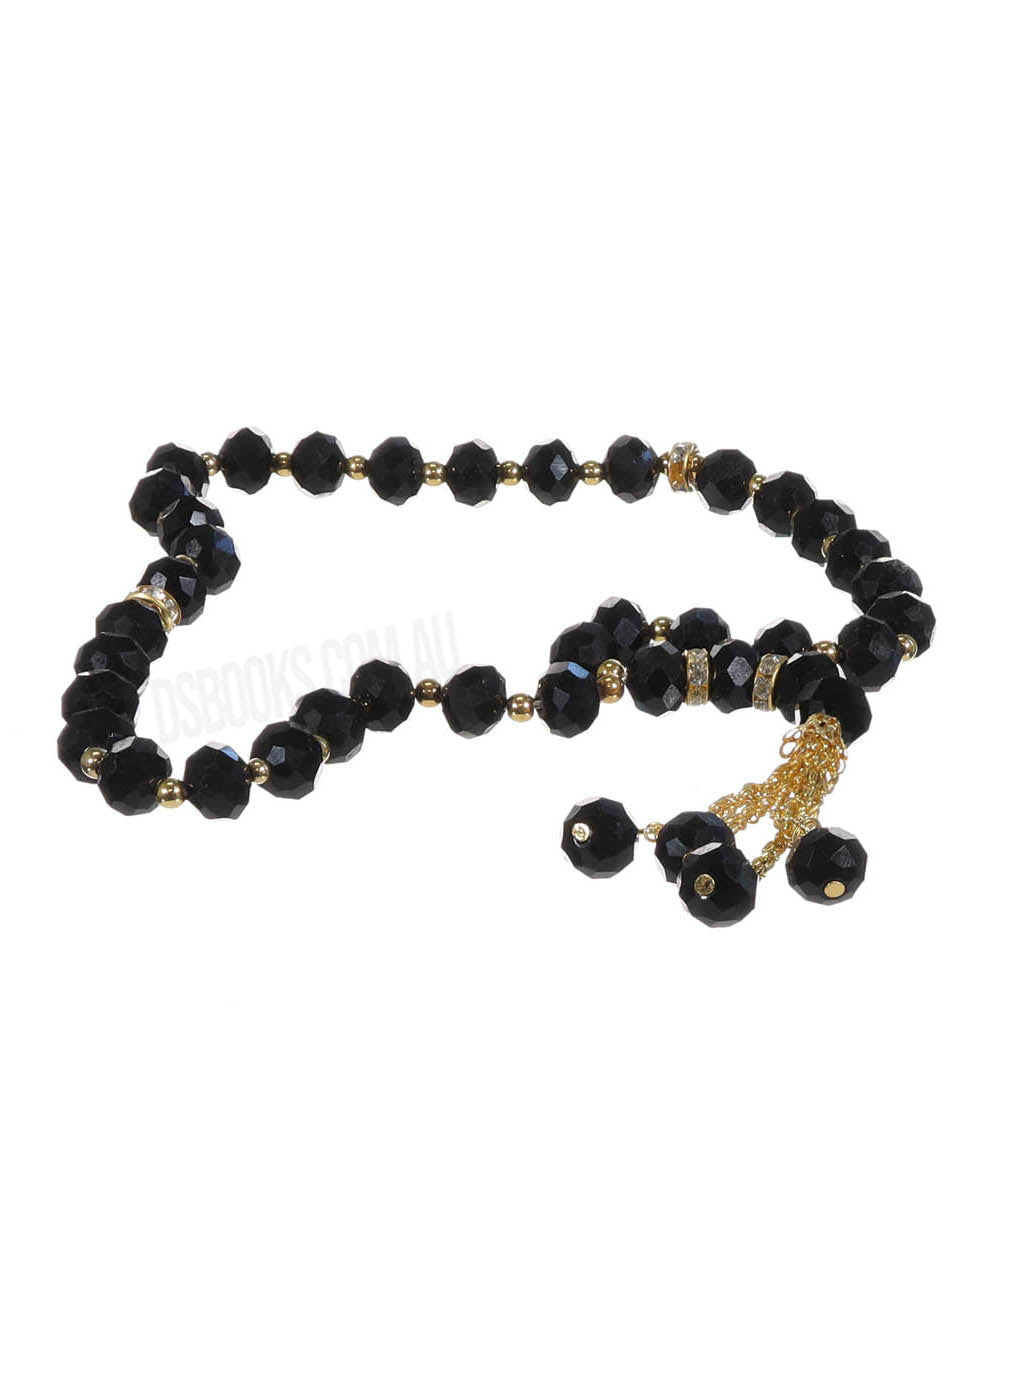 Deluxe Black and Gold Tasbih